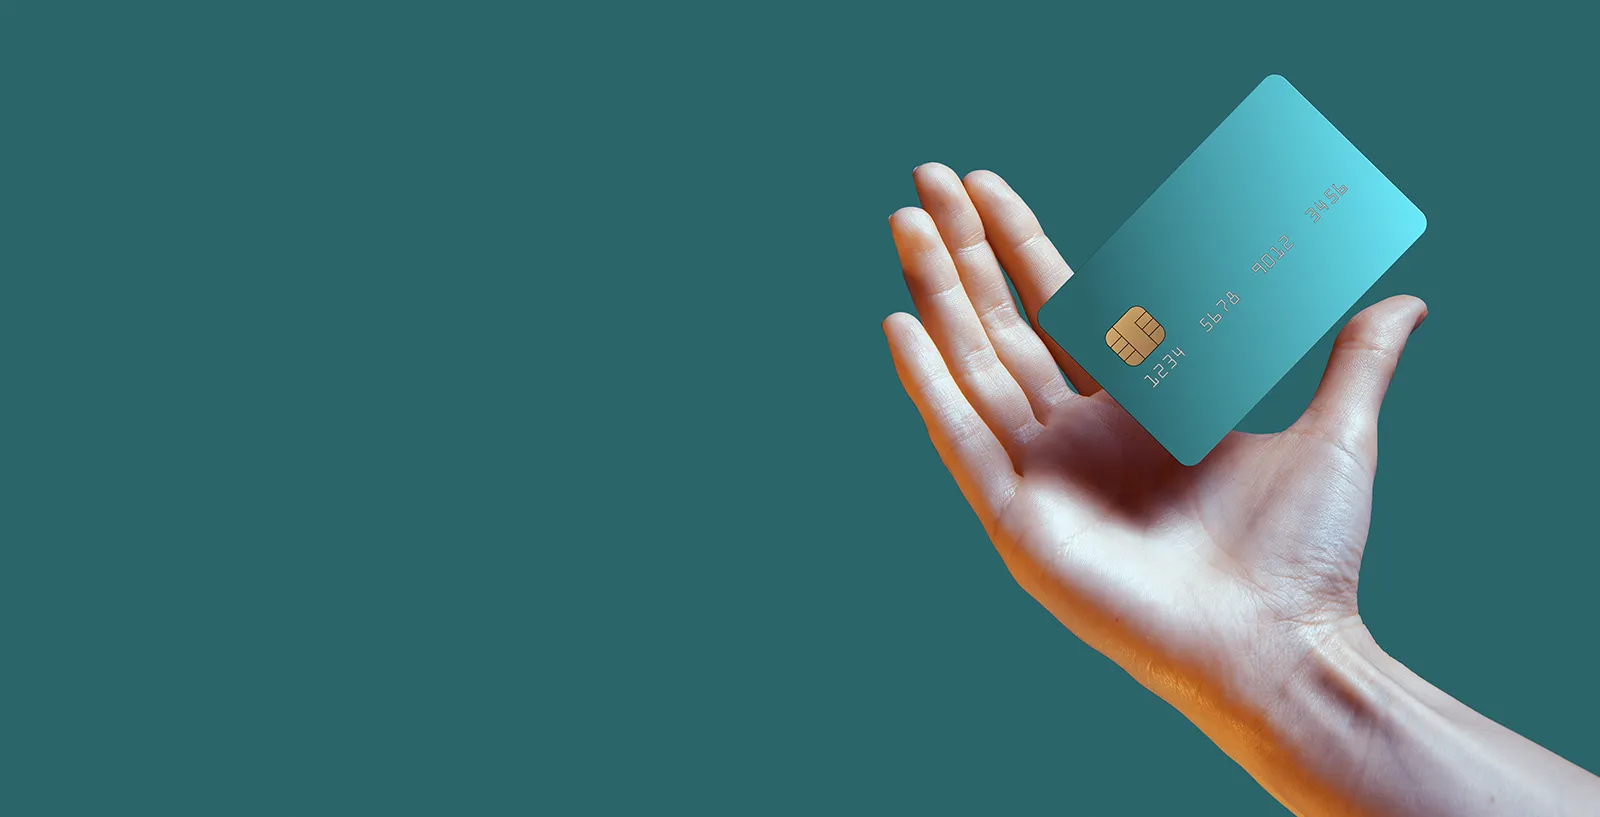 Womans hand holding a credit card on a teal background